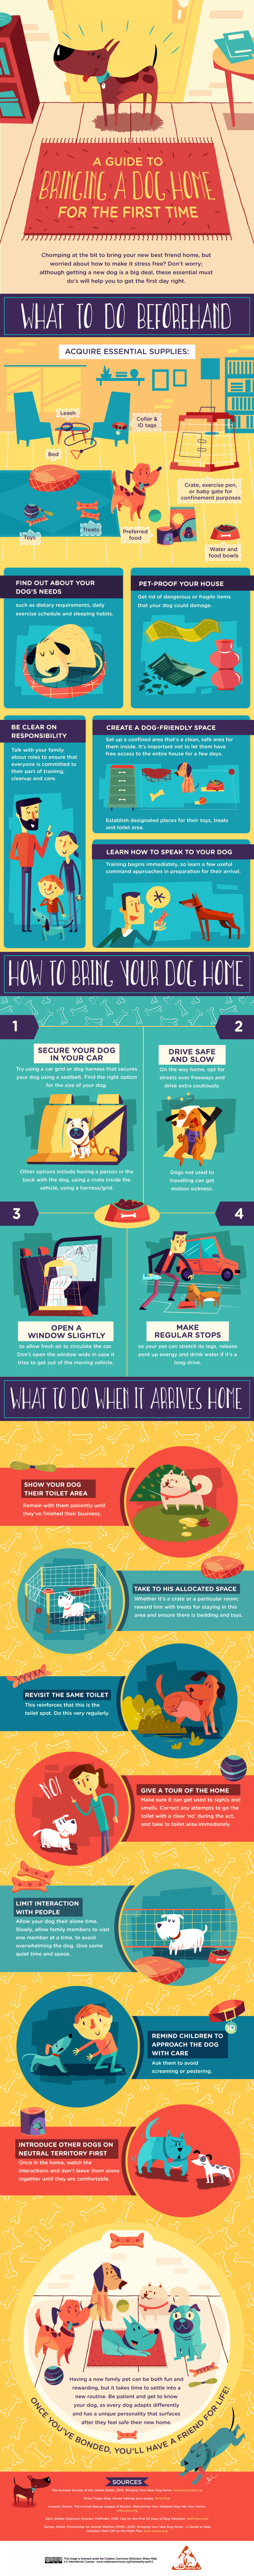 Infographic showing how to introduce your dog to their new home without causing any trauma